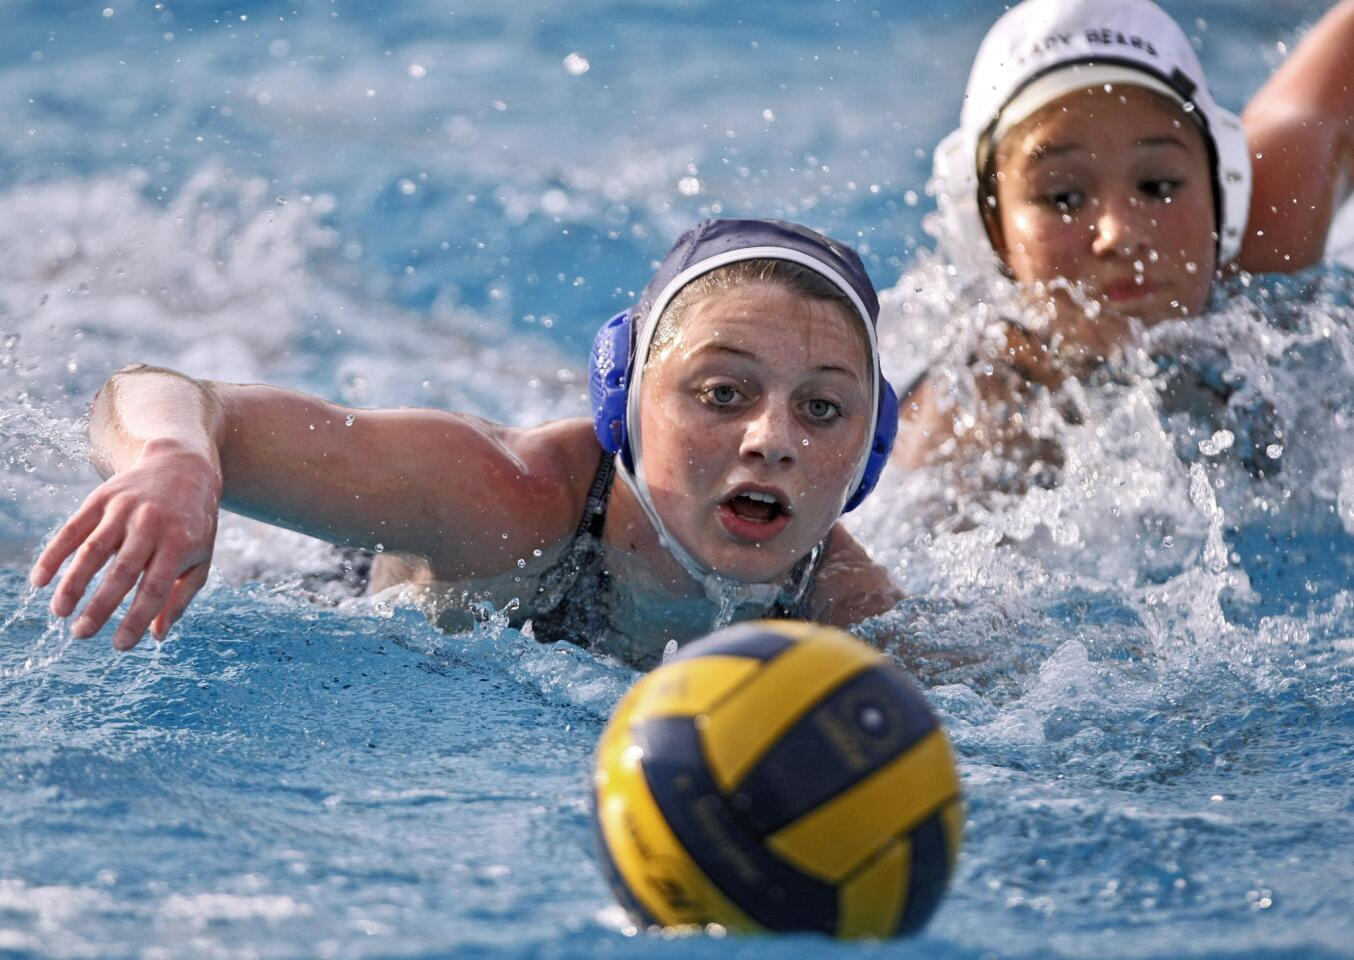 Crescenta Valley High School girls water polo player #2 Audrey Taylor chases a pass in CIF SS. Div. V semifinal match vs. Warren High School at Whittier College in Whittier on Wednesday, Feb. 26, 2014. CVHS lost the match.